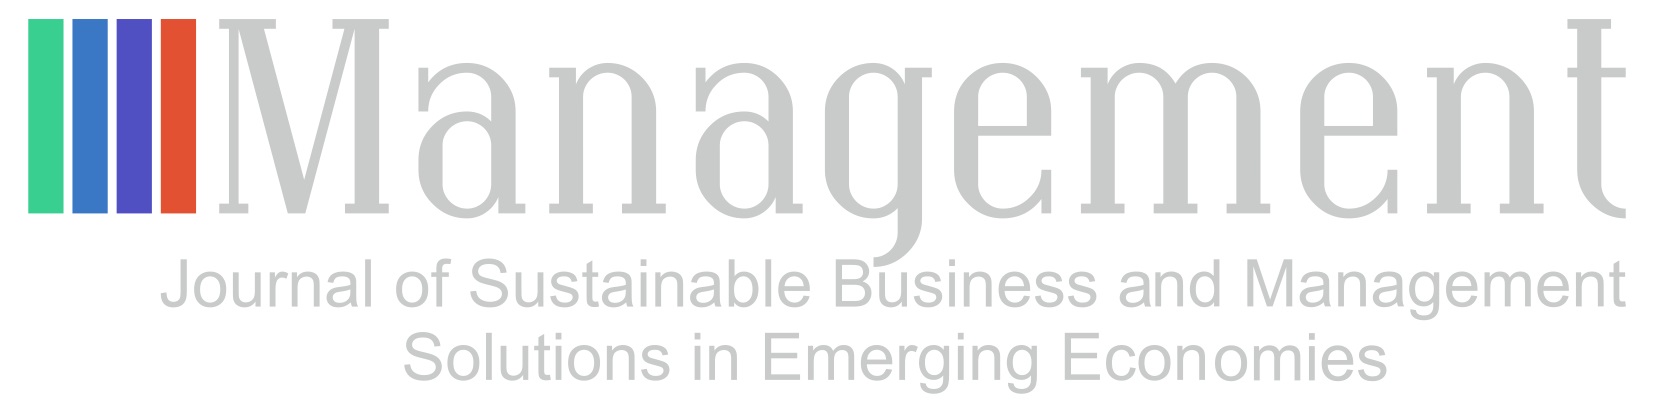 Management: Journal of Sustainable Business and Management Solutions in Emerging Economies